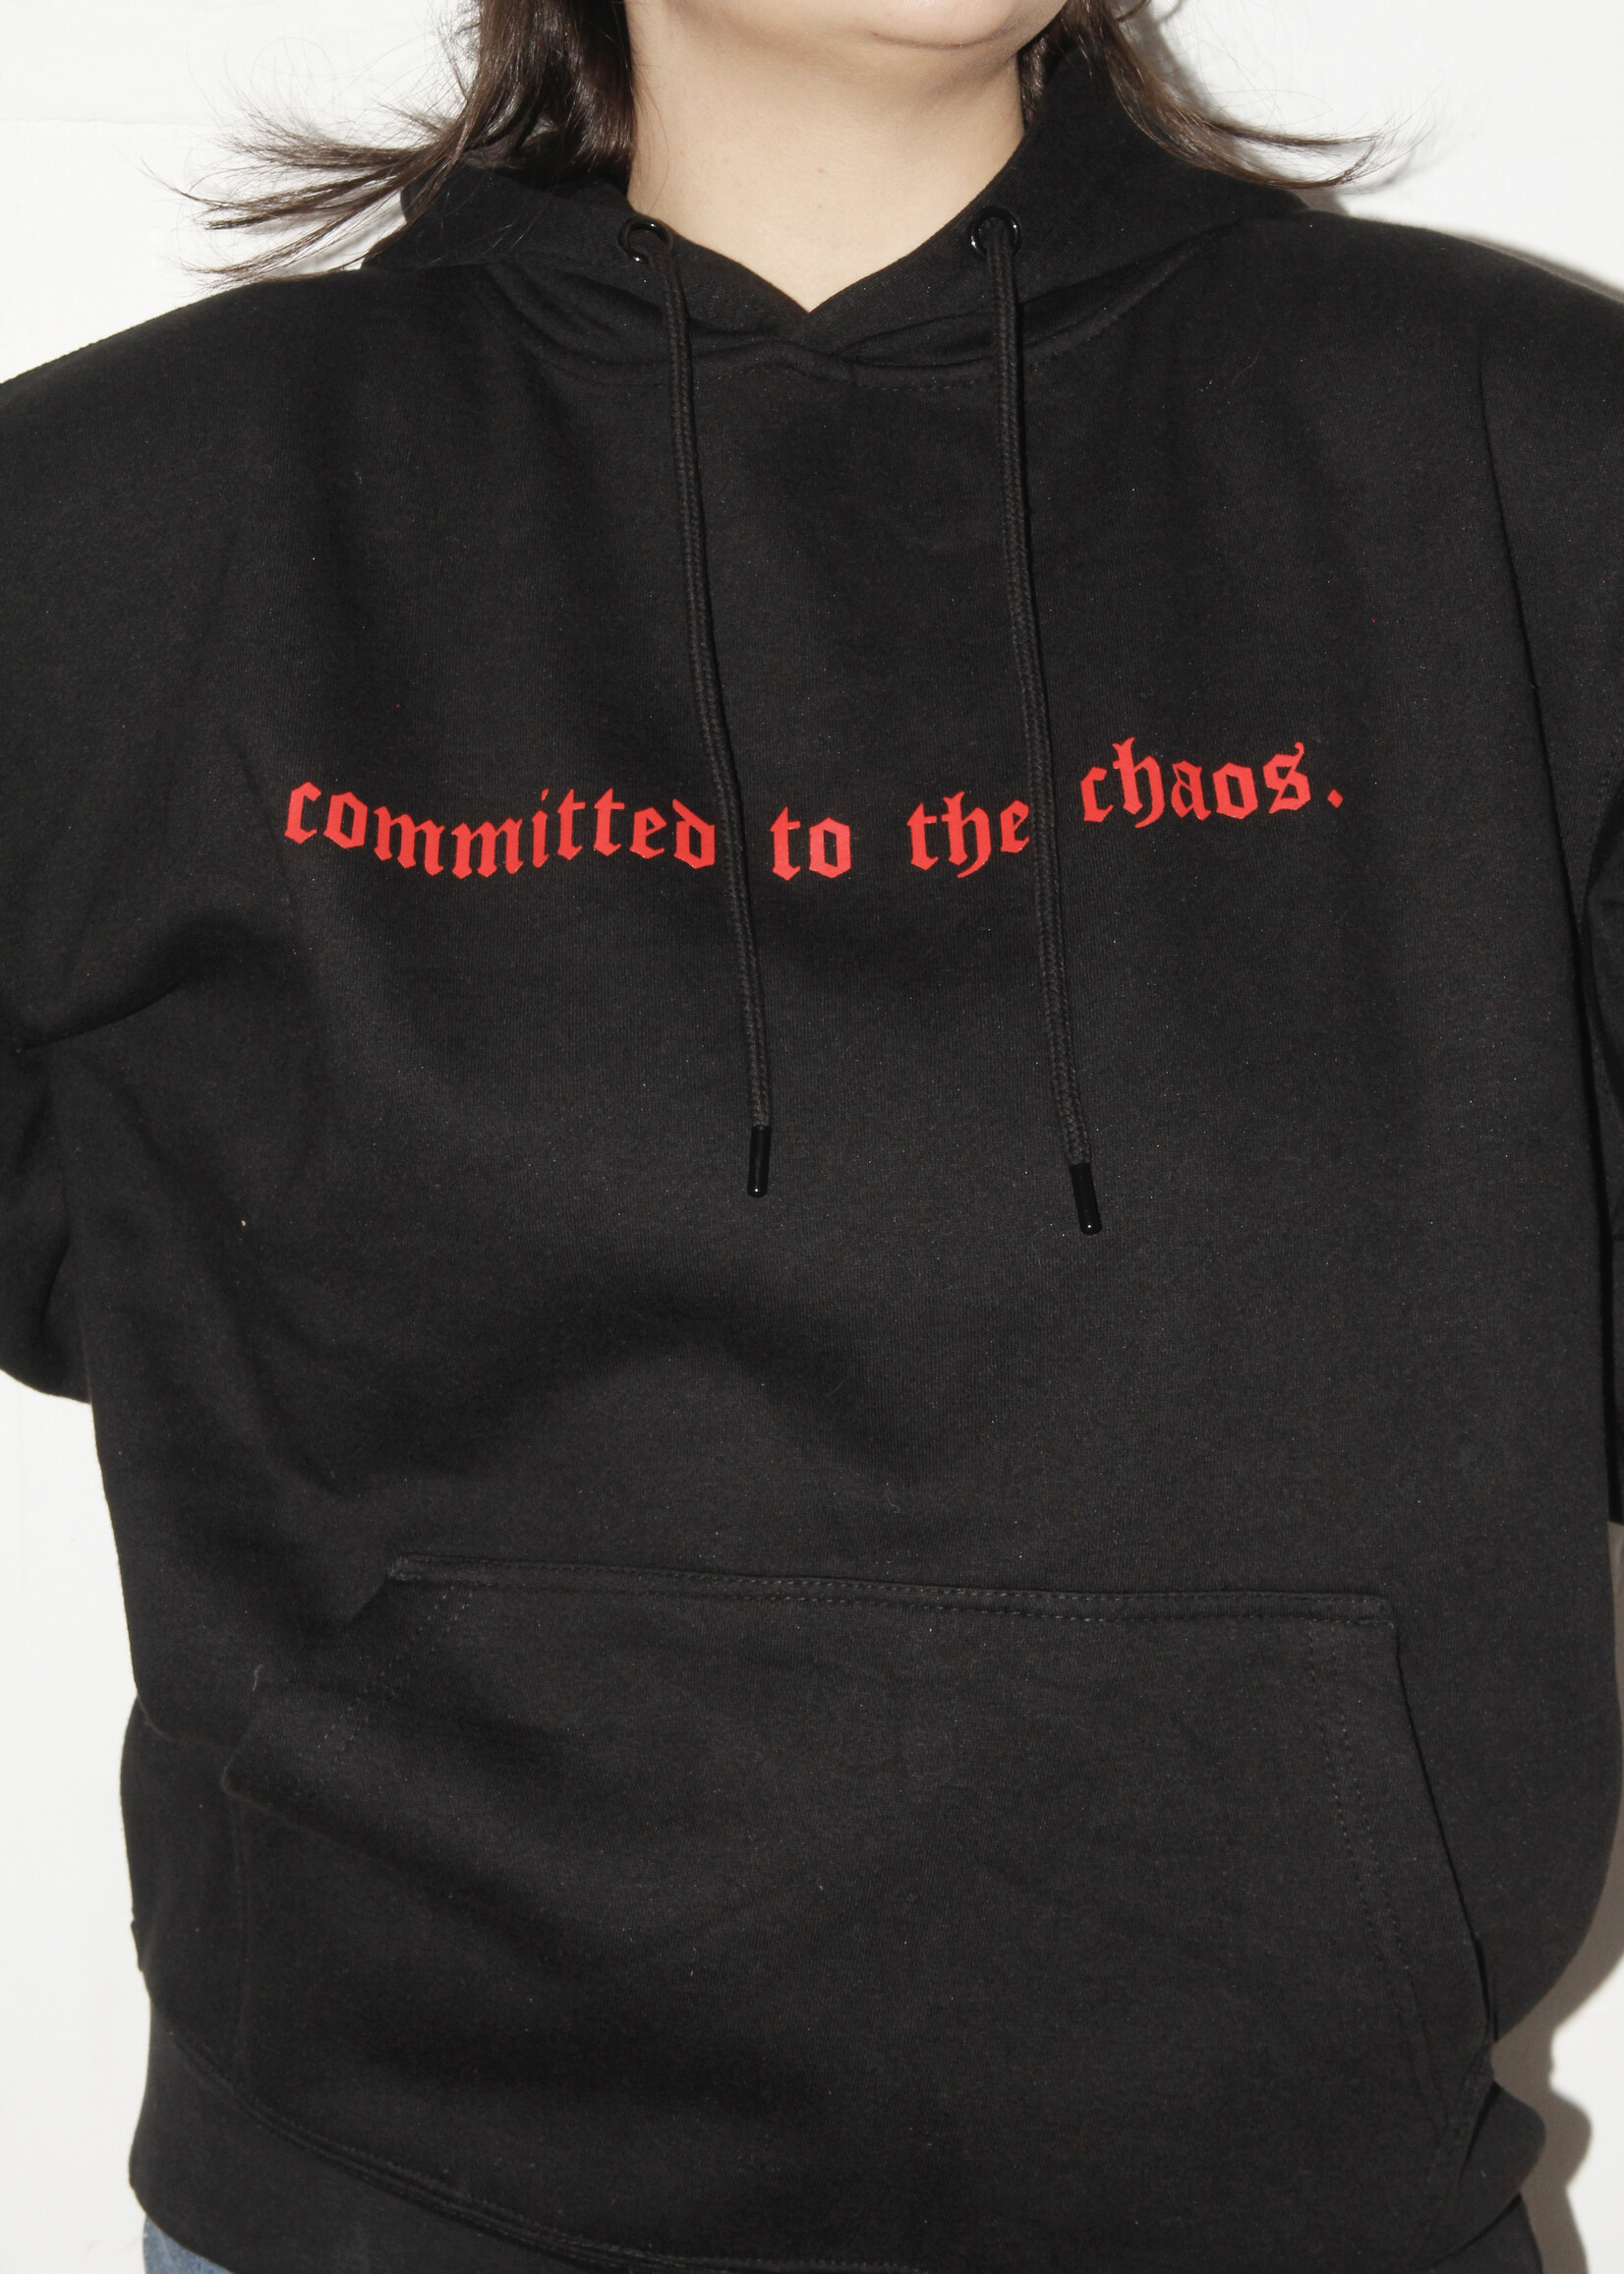 Sensitive Ass Fish Sensitive Ass Fish "Committed to the Chaos" Hoodie